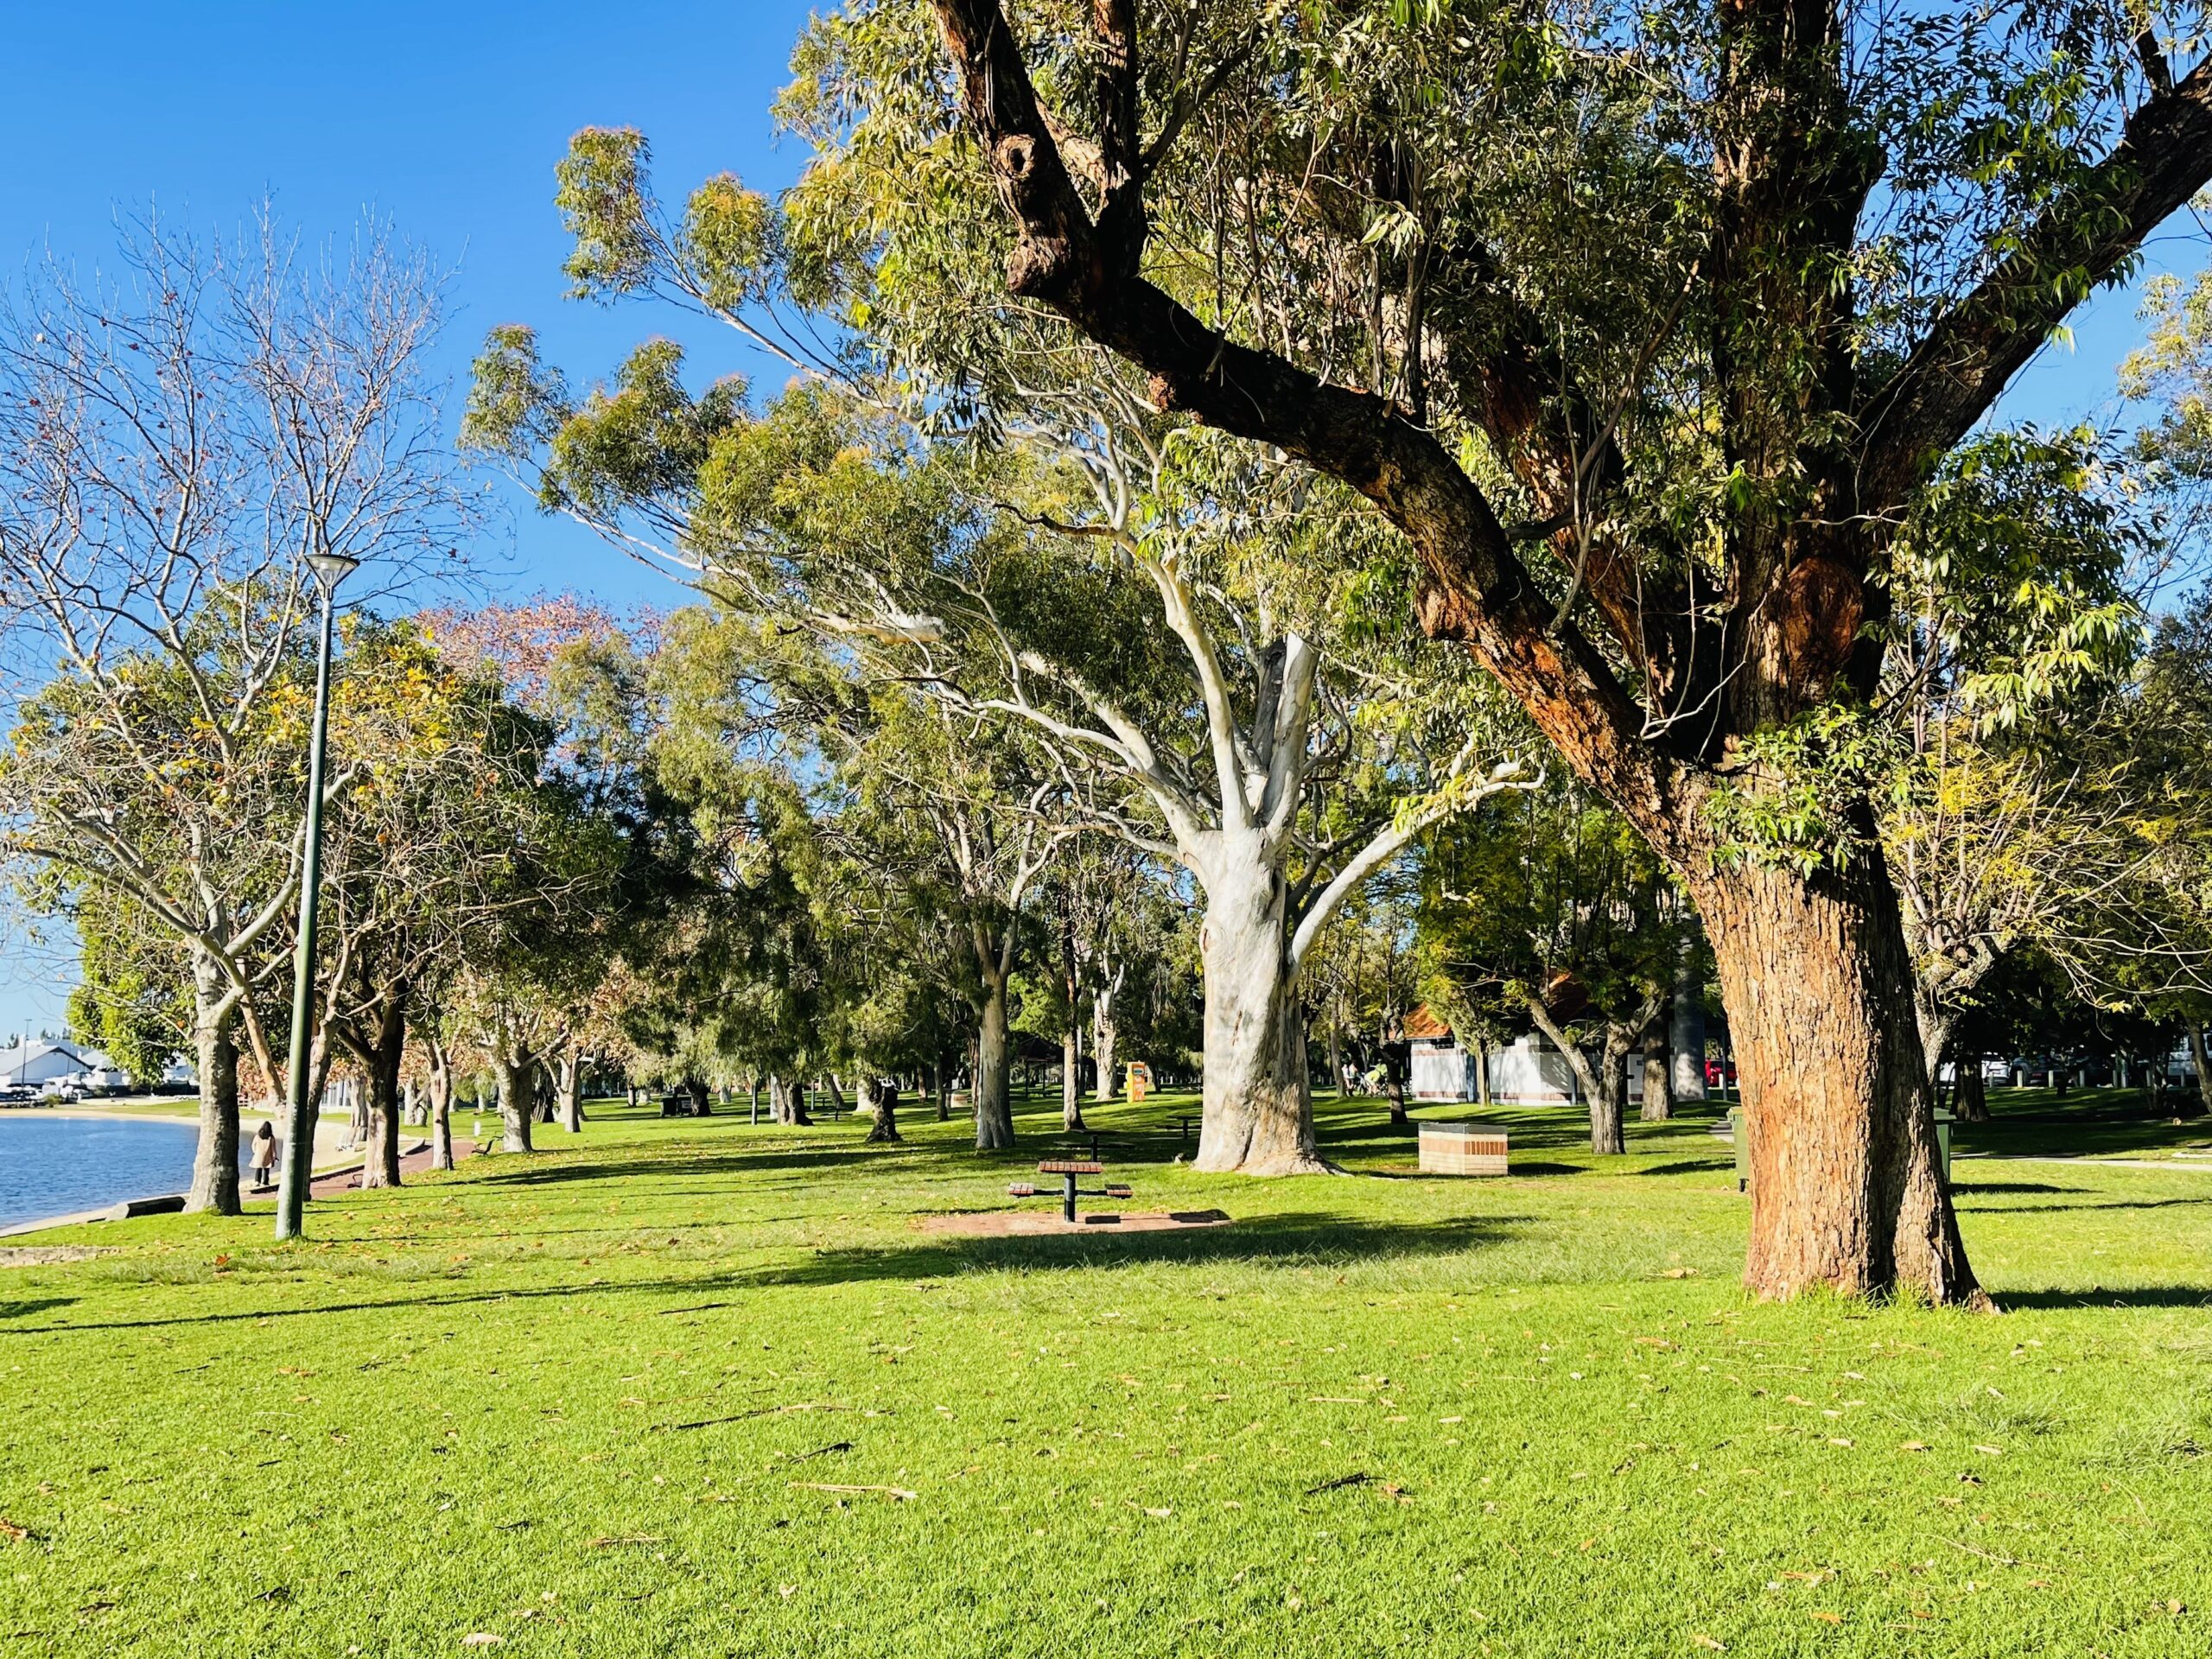 A photo of a grassed section of the reserve. Many kinds of trees can be seen with different coloured bark, ranging from dark brown to light grey. All the trees have lush green foliage. A wooden picnic table and benches can be seen amongst the trees. The sky above is clear and blue